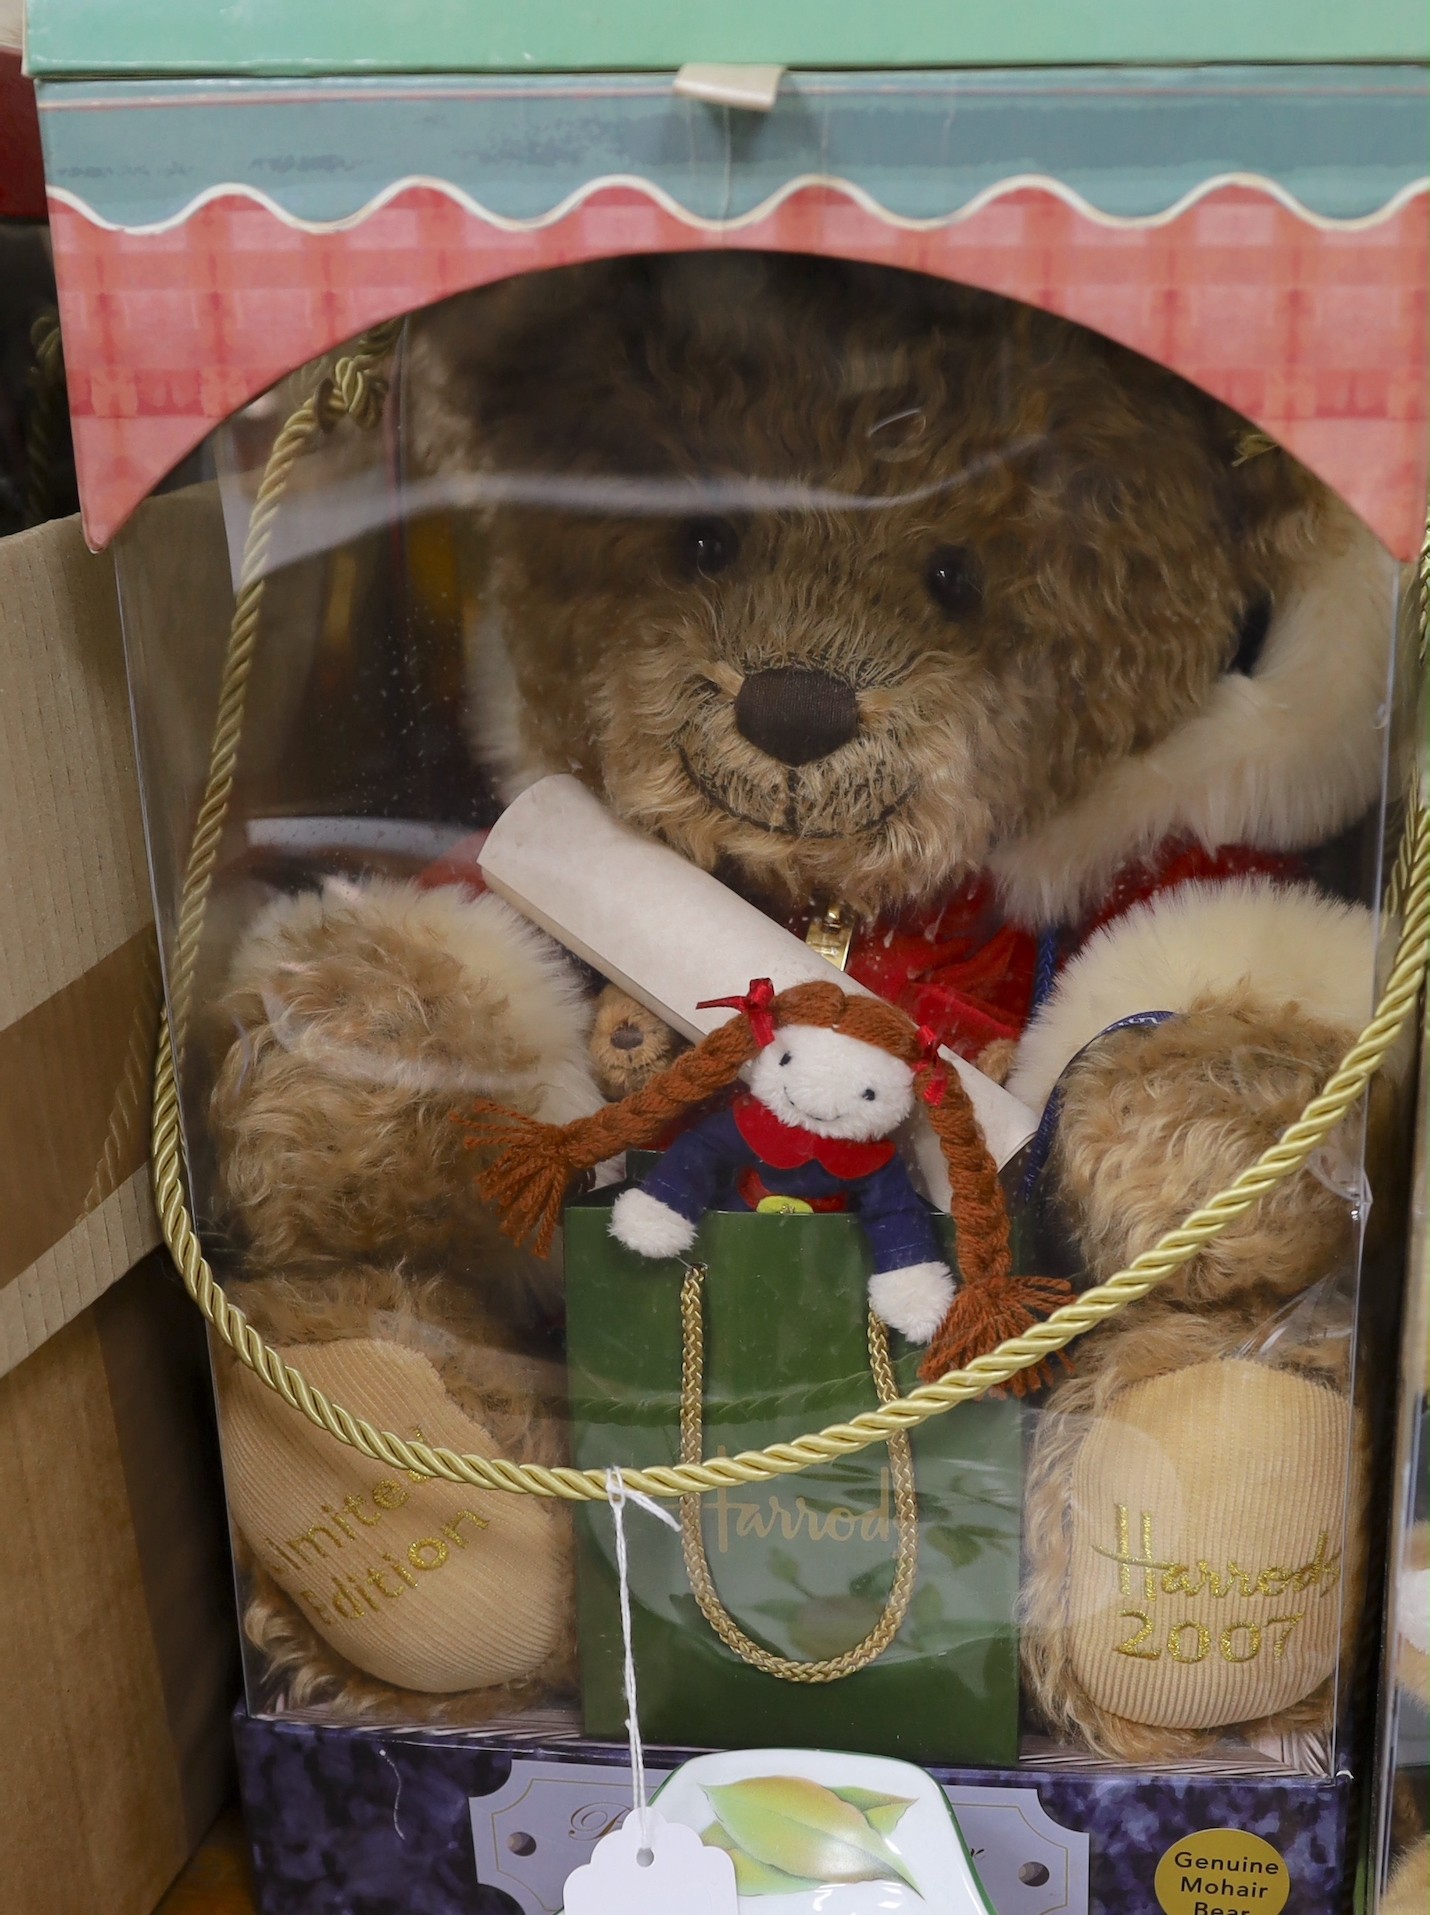 A limited edition Harrods Benjamin bear, 2007, in sealed box, never opened